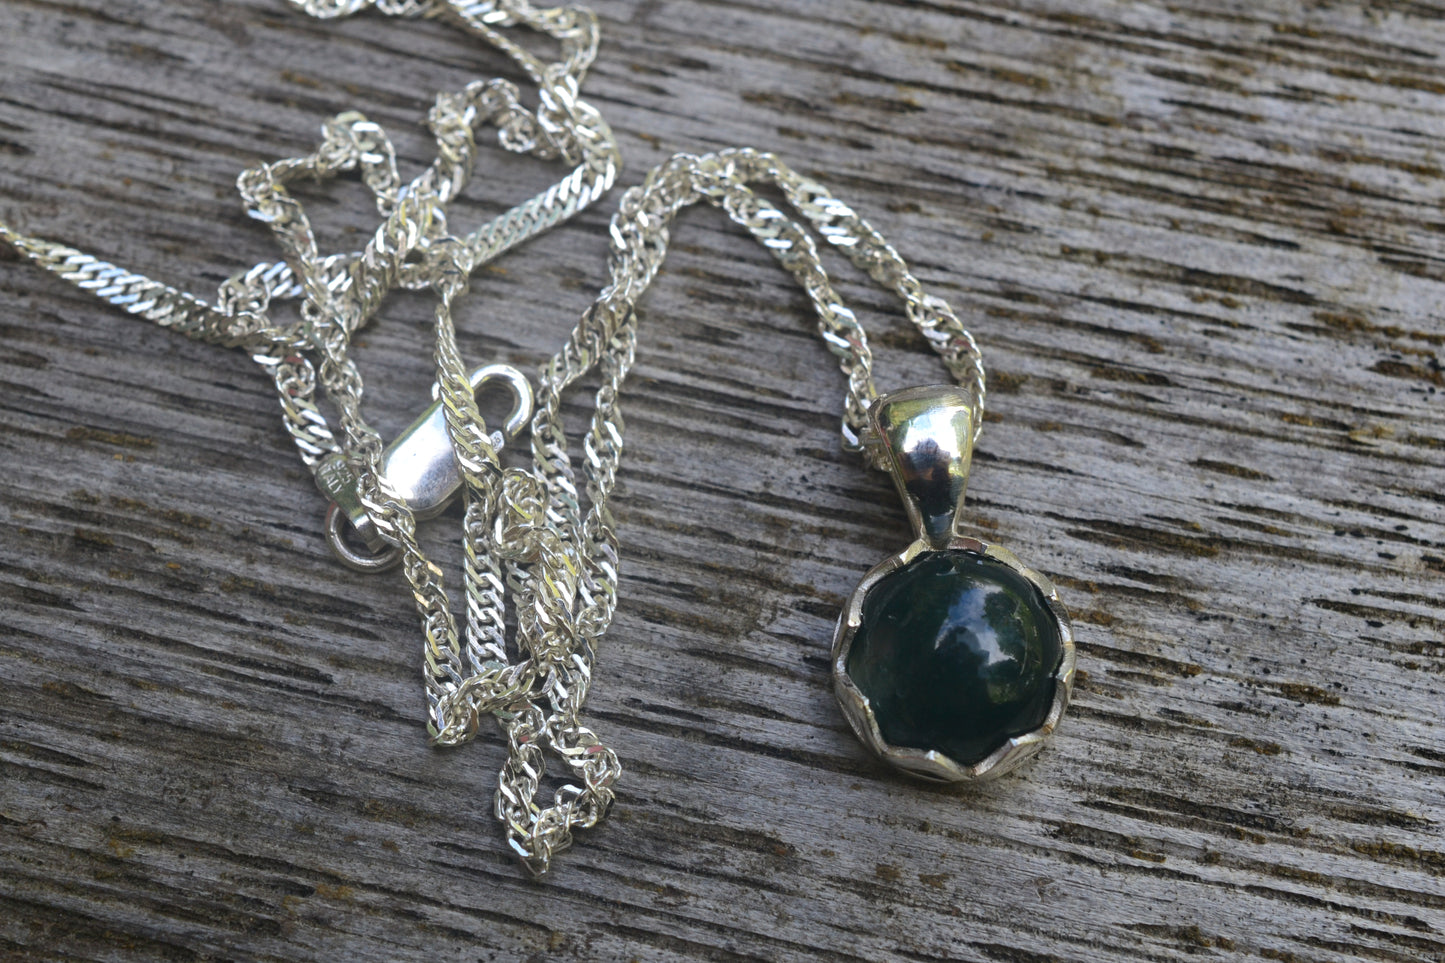 10mm Moss Agate Necklace With Sterling Chain